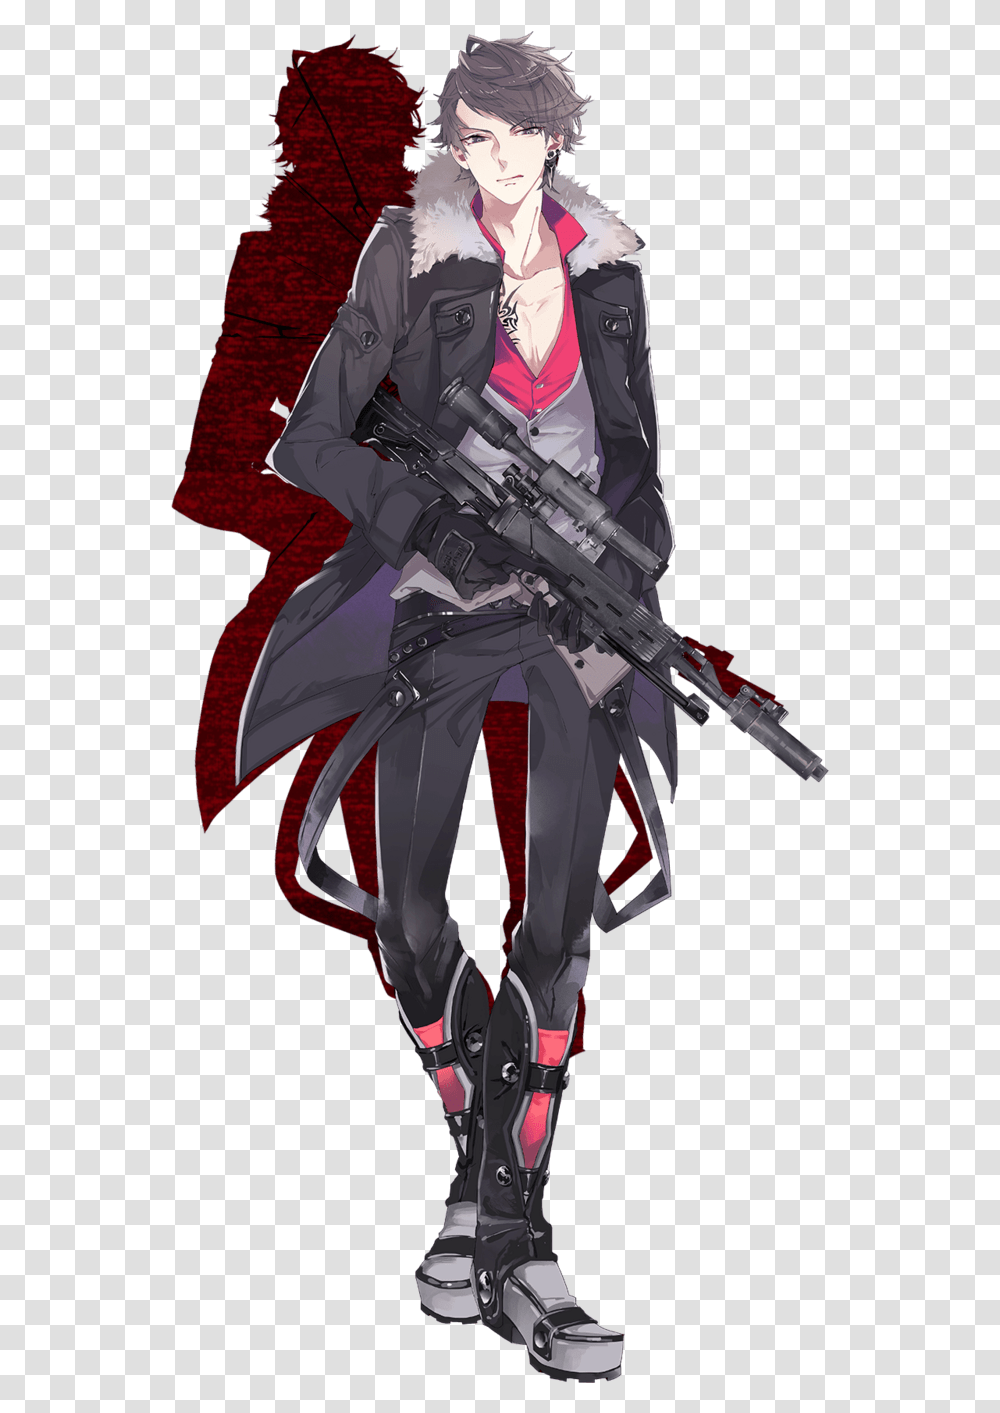 Anime Guy With Gun Image Anime Guy With Gun, Weapon, Weaponry, Person, Human Transparent Png